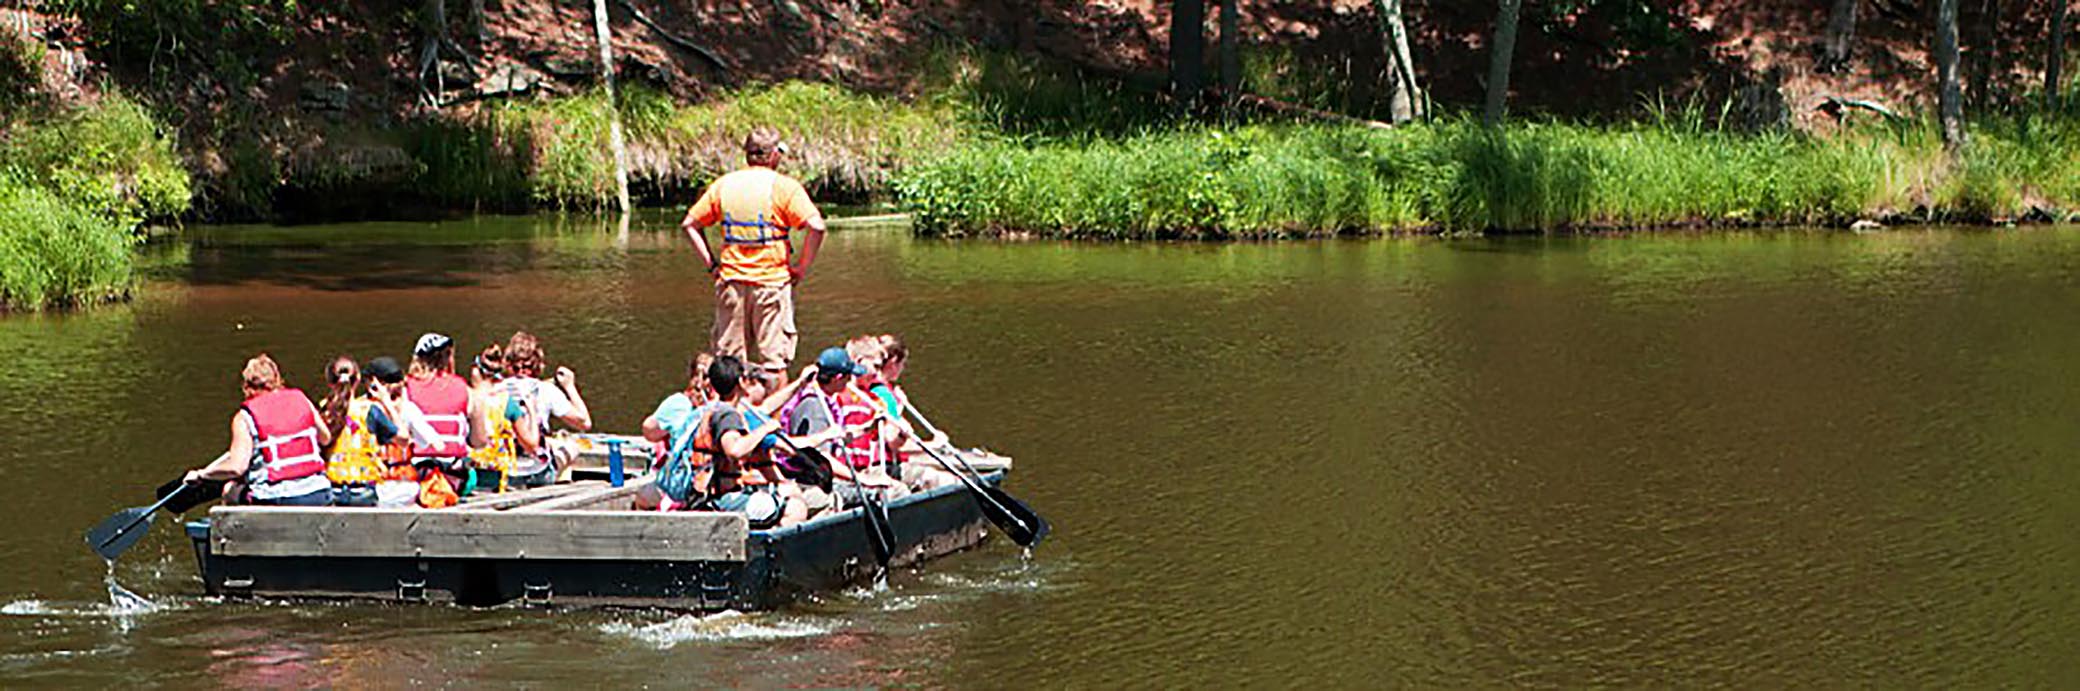 A group of 13 people on a large wooden raft in a river